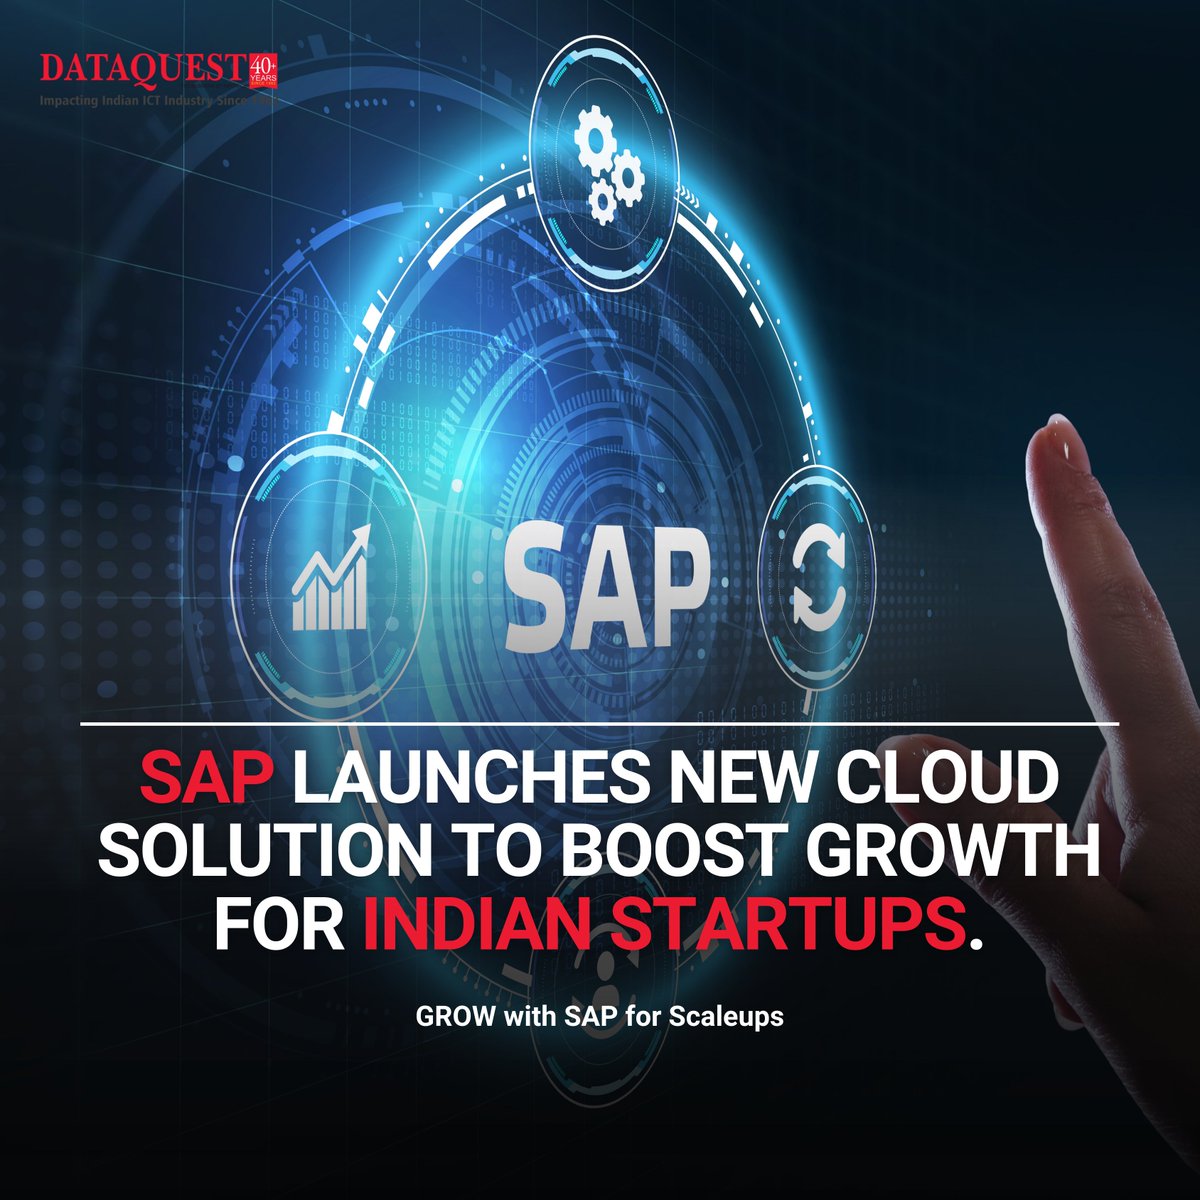 SAP has launched a new cloud solution called 'GROW with SAP for Scaleups' to help fast-growing startups in India. 

#SAP #GrowWithSAP #Scaleups #StartupEcosystem #Innovation #IndiaStartups #CloudSolution #BusinessGrowth #FreeTrial #EmpoweringStartups